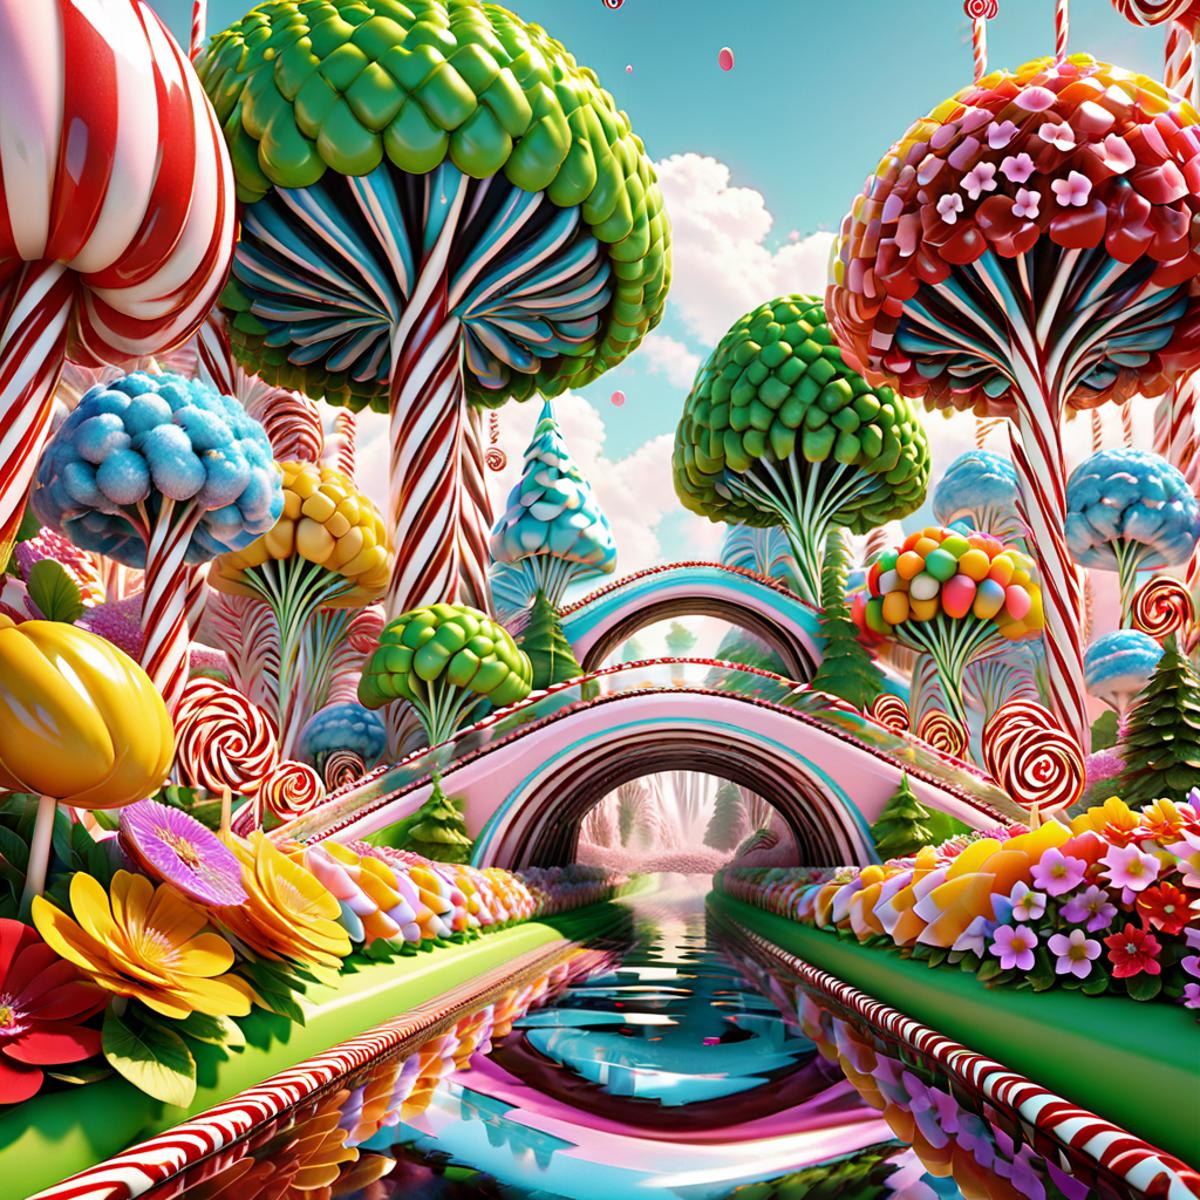 Candy Land image by _Pixel